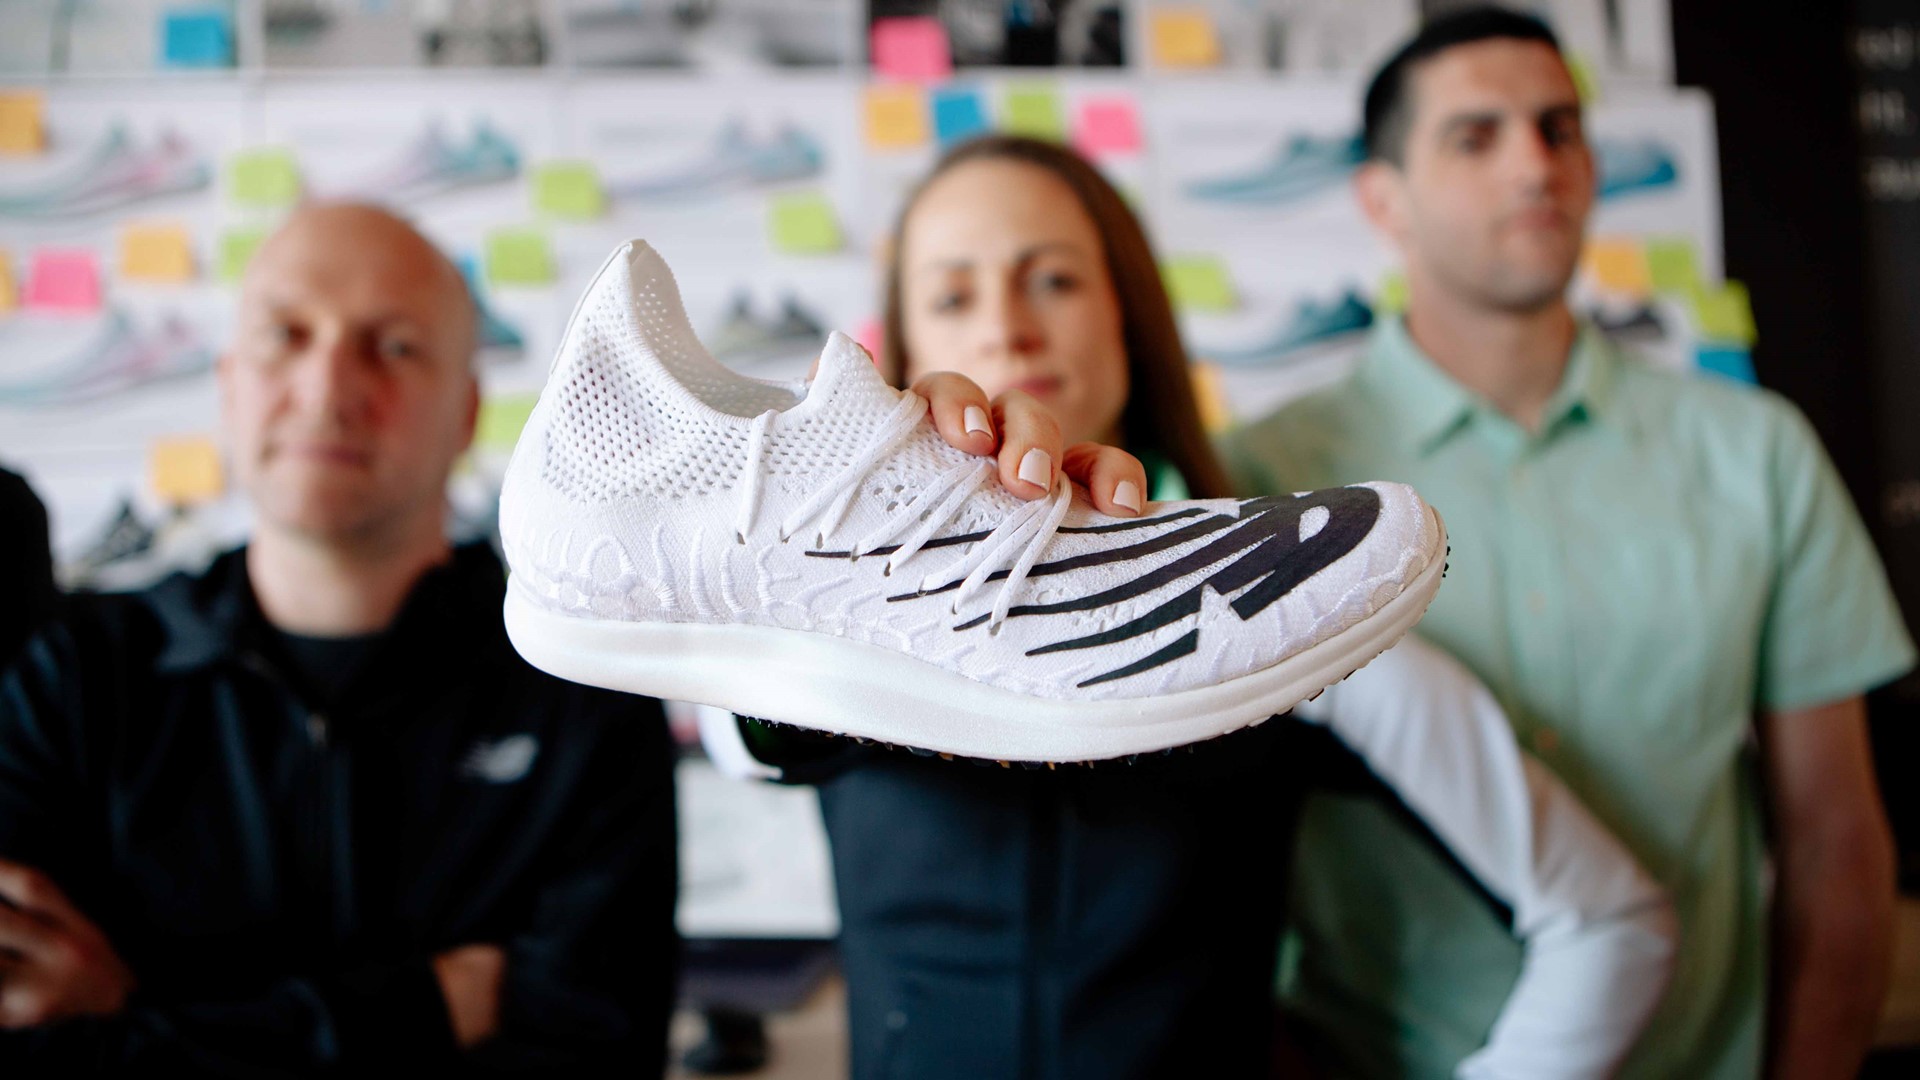 Ellos Libro césped New Balance Press Box : Team New Balance Athlete Jenny Simpson with the  FuelCell 5280 Design Team